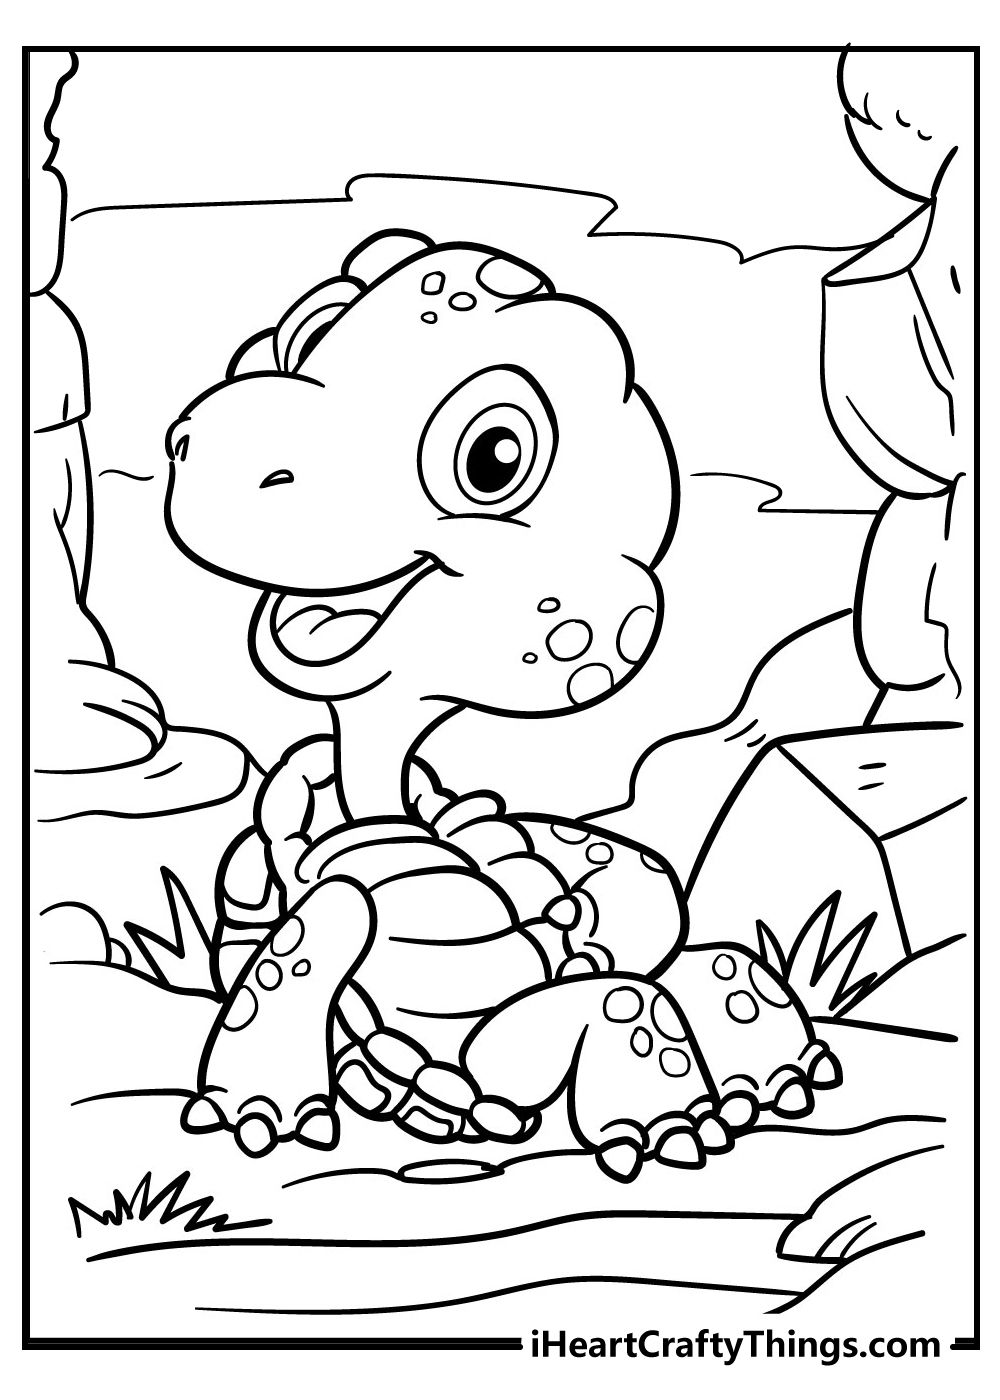 Cute Turtle Coloring Pages for Kids Printable 94